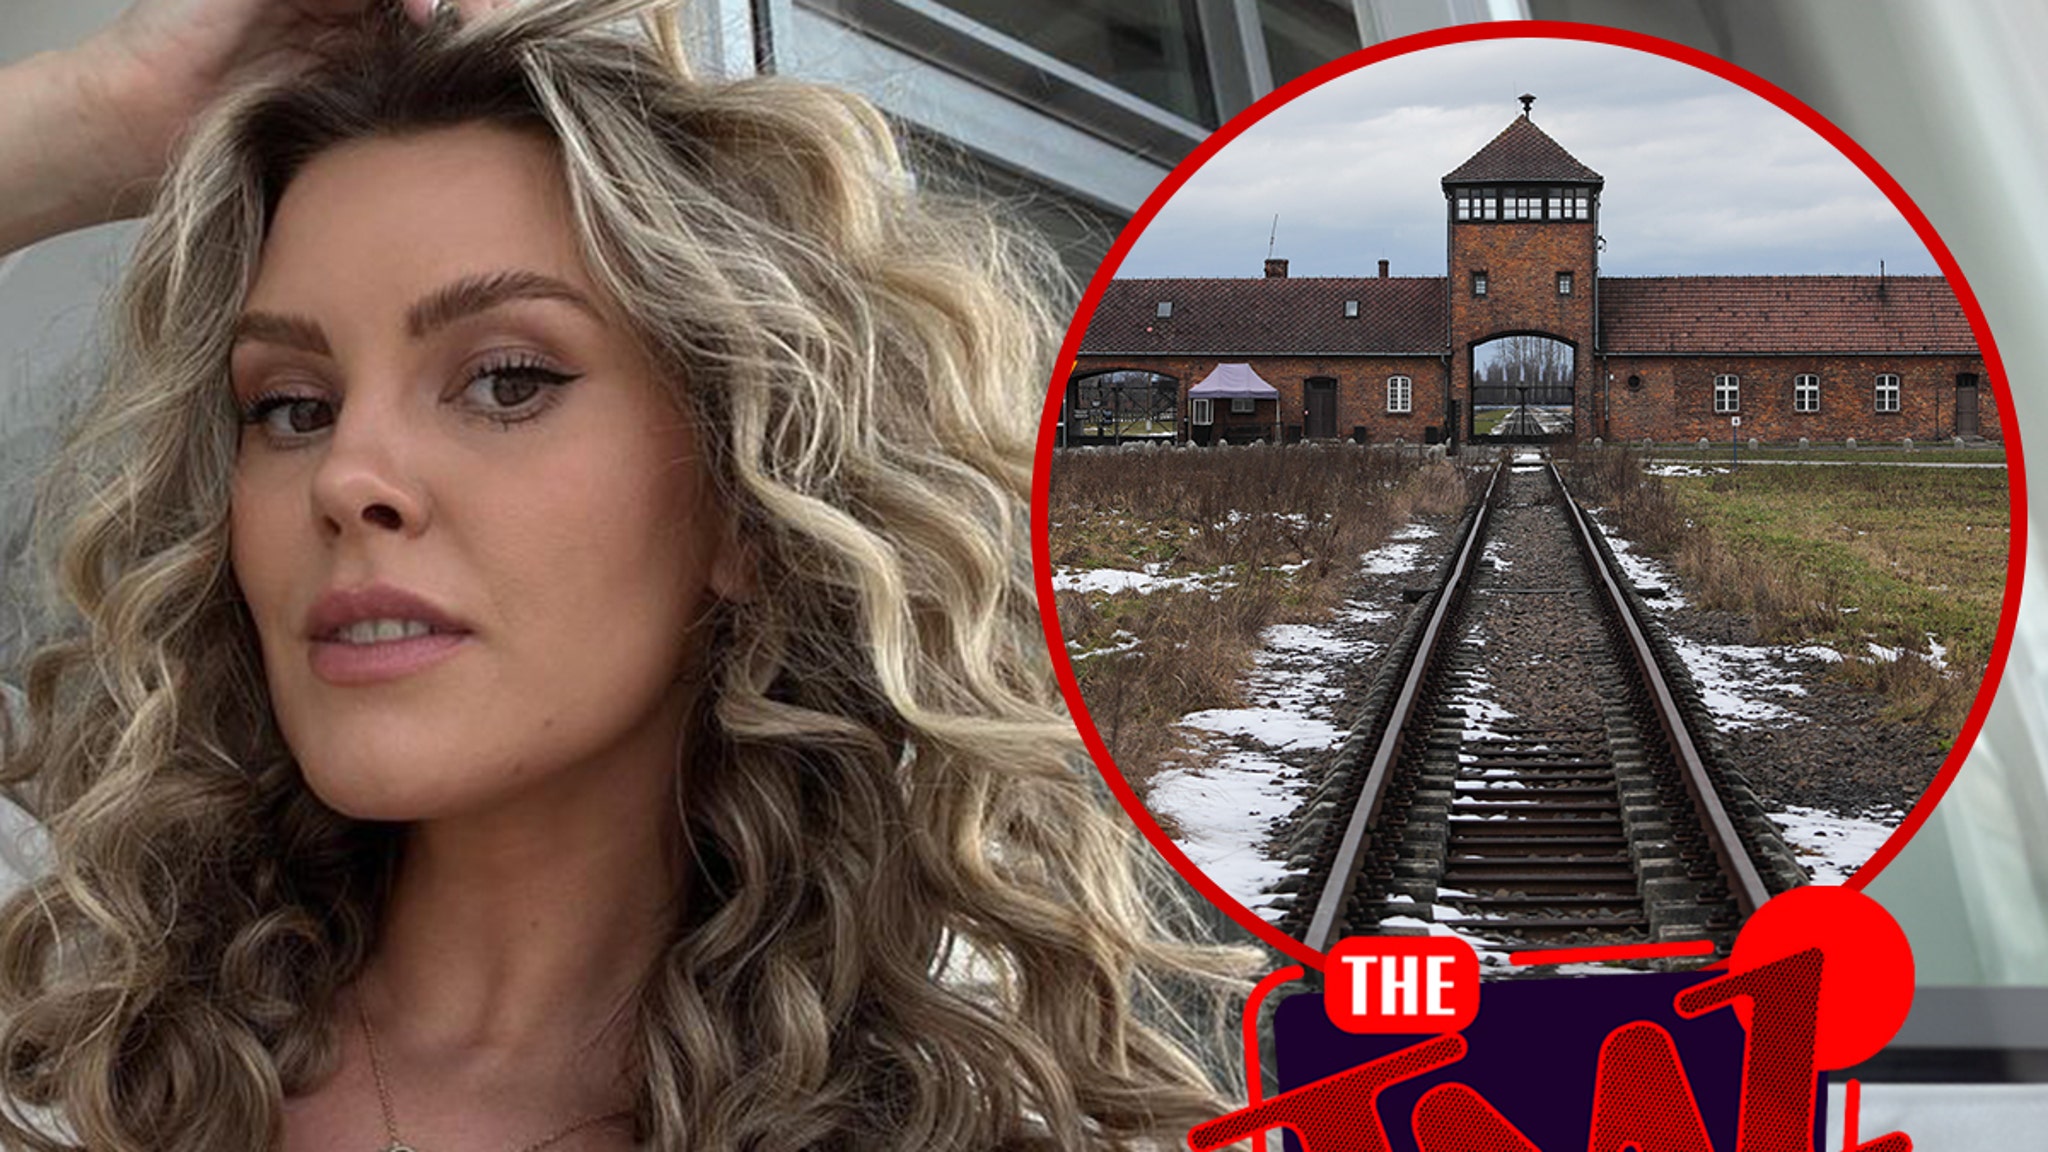 ‘Bachelor’ contestant Anna Redman says she received death threats over her Auschwitz essay